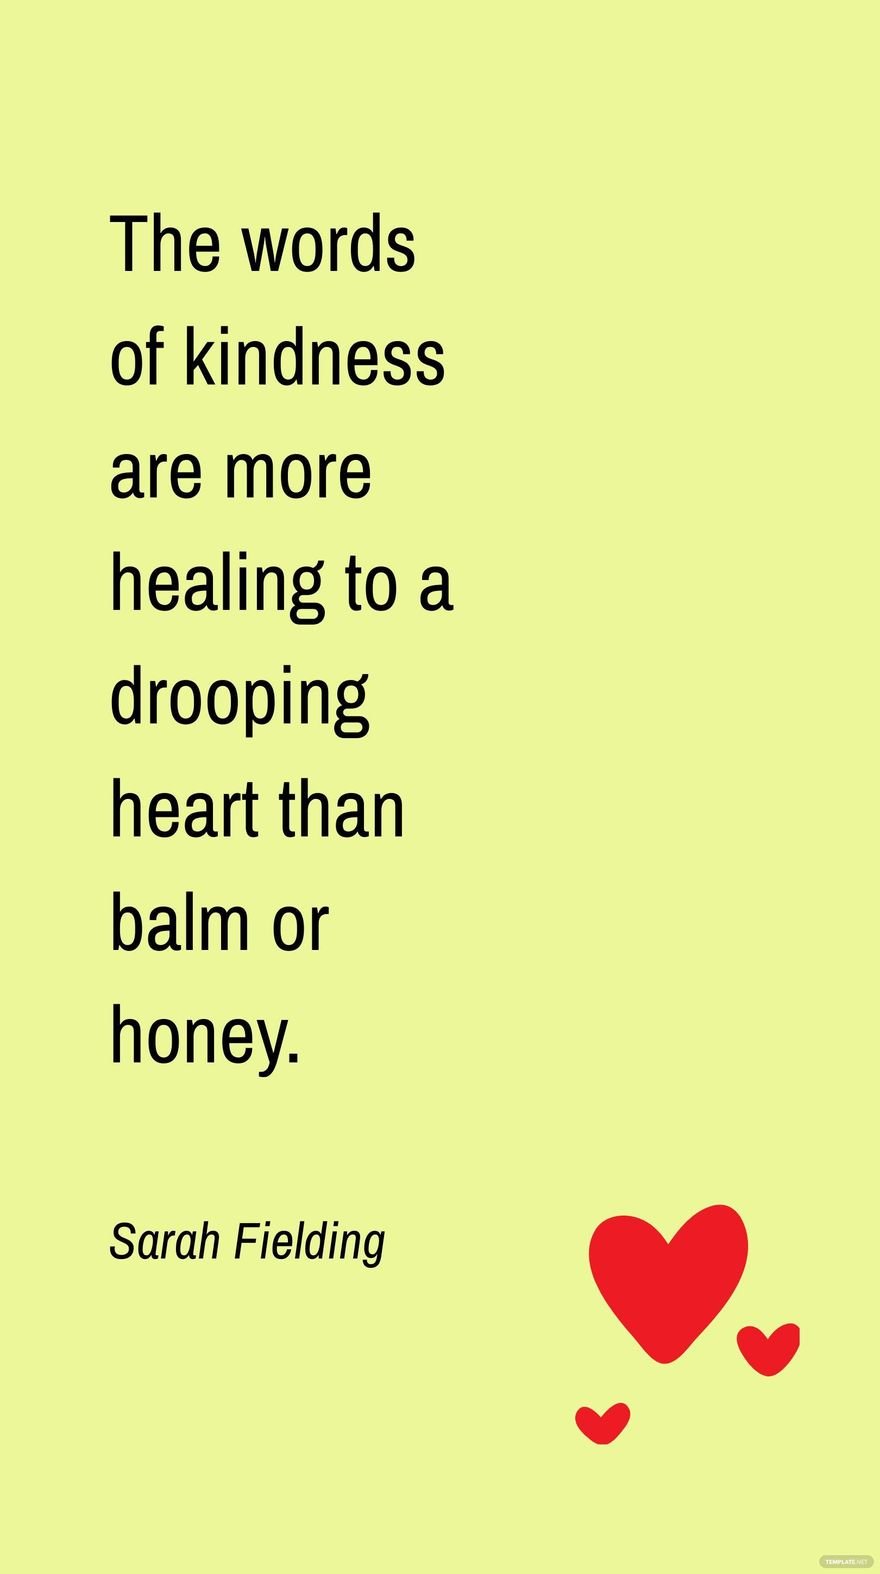 Sarah Fielding - The words of kindness are more healing to a drooping heart than balm or honey.